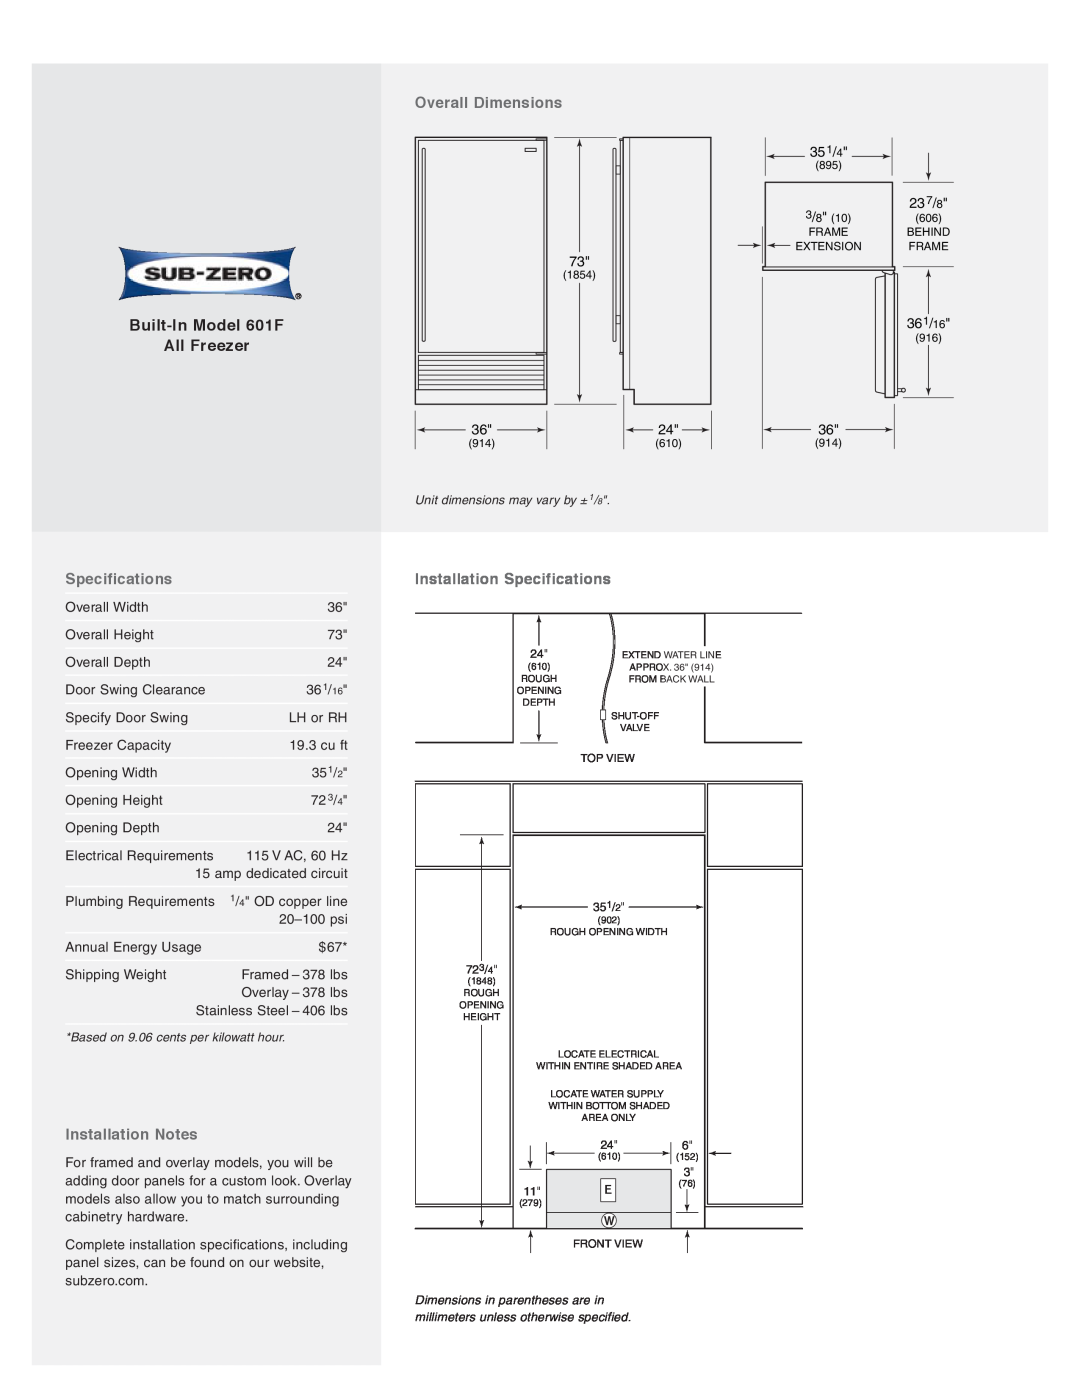 Sub-Zero 601F/P Overall Dimensions, Installation Notes, Installation Specifications, Built-In Model 601F All Freezer 